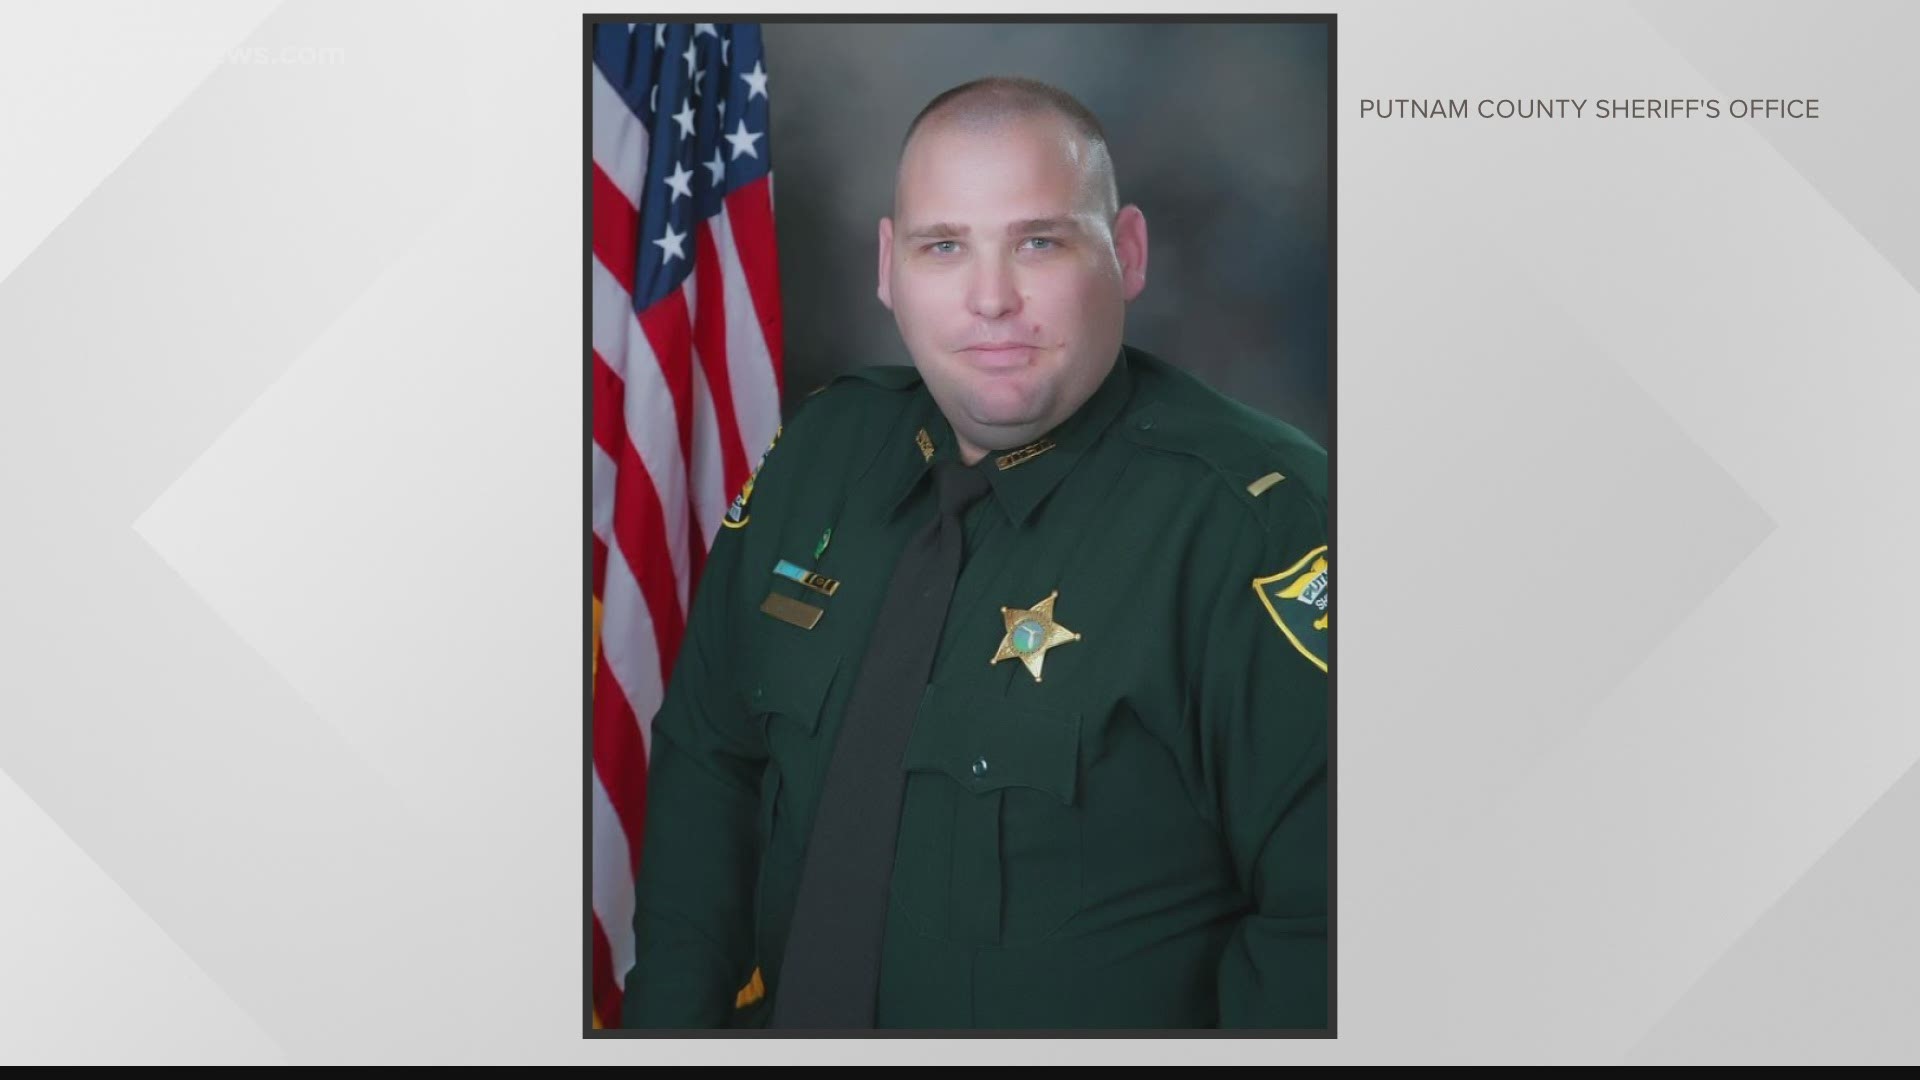 Putnam County corrections officer killed in motorcycle crash on way to work, sheriff's office says